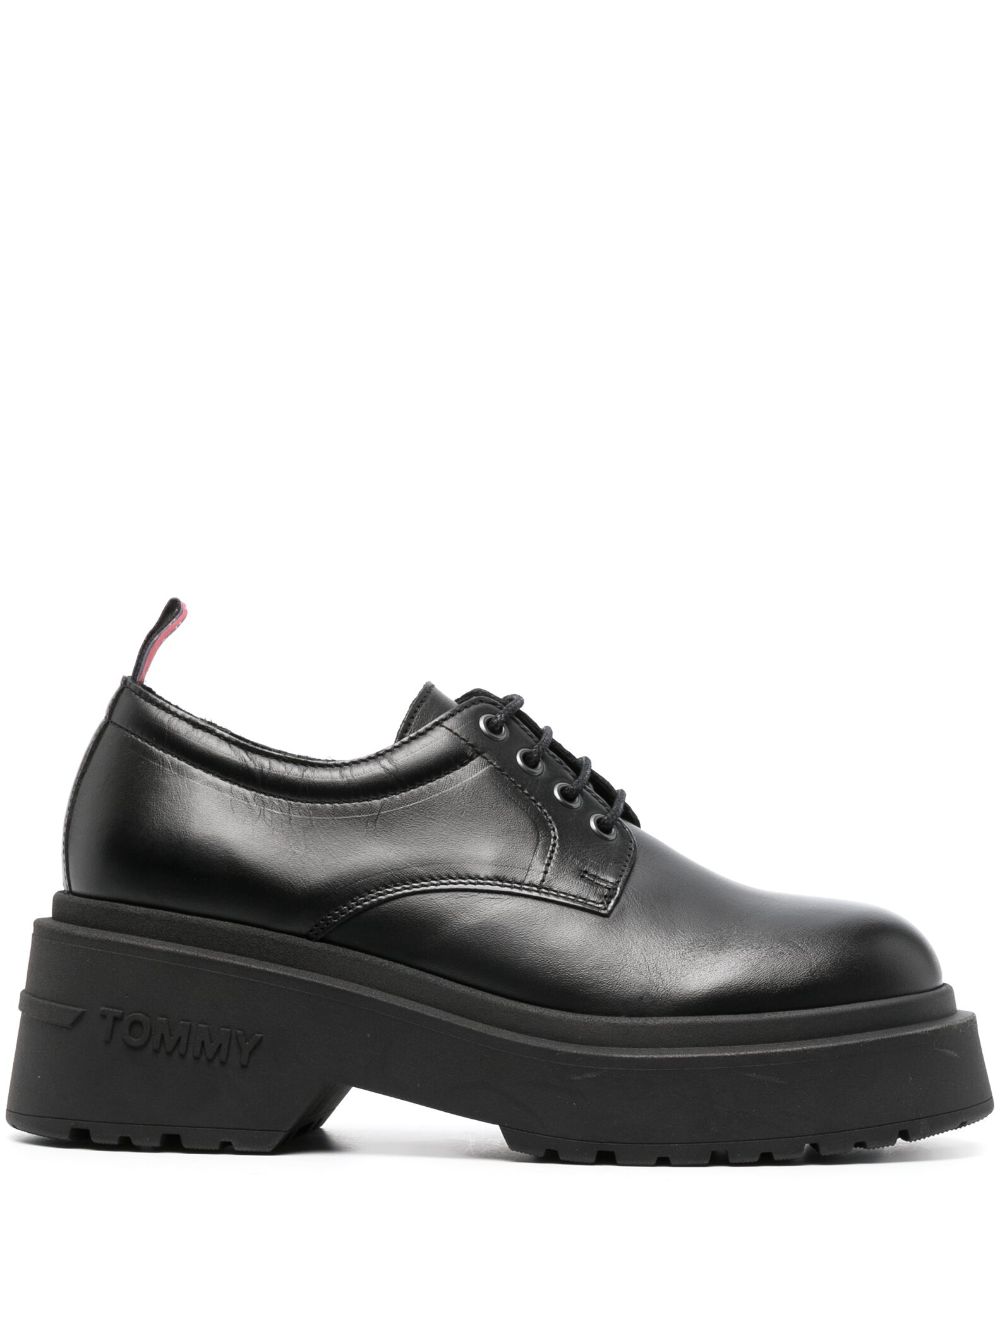 Tommy Jeans Ava leather Oxford shoes - Black von Tommy Jeans